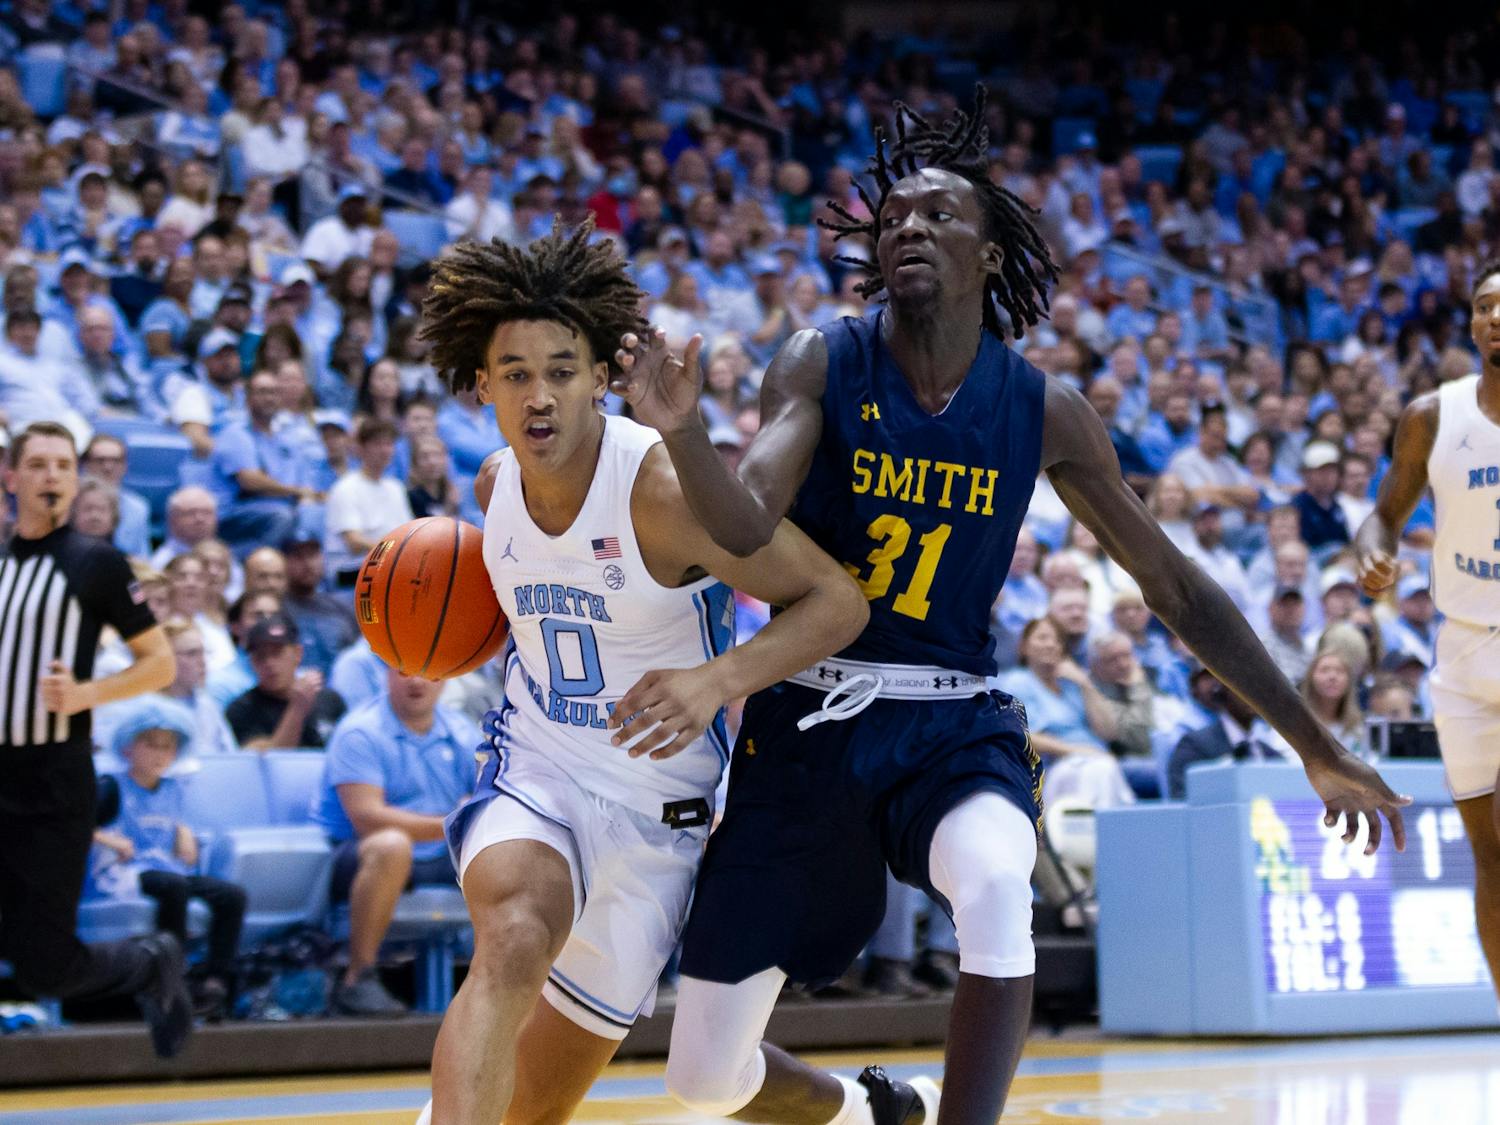 UNC freshman guard Seth Trimble (0) defends the ball during the basketball game against JCSU on Friday, Oct. 8, 2022. UNC beat JCSU 101-40.